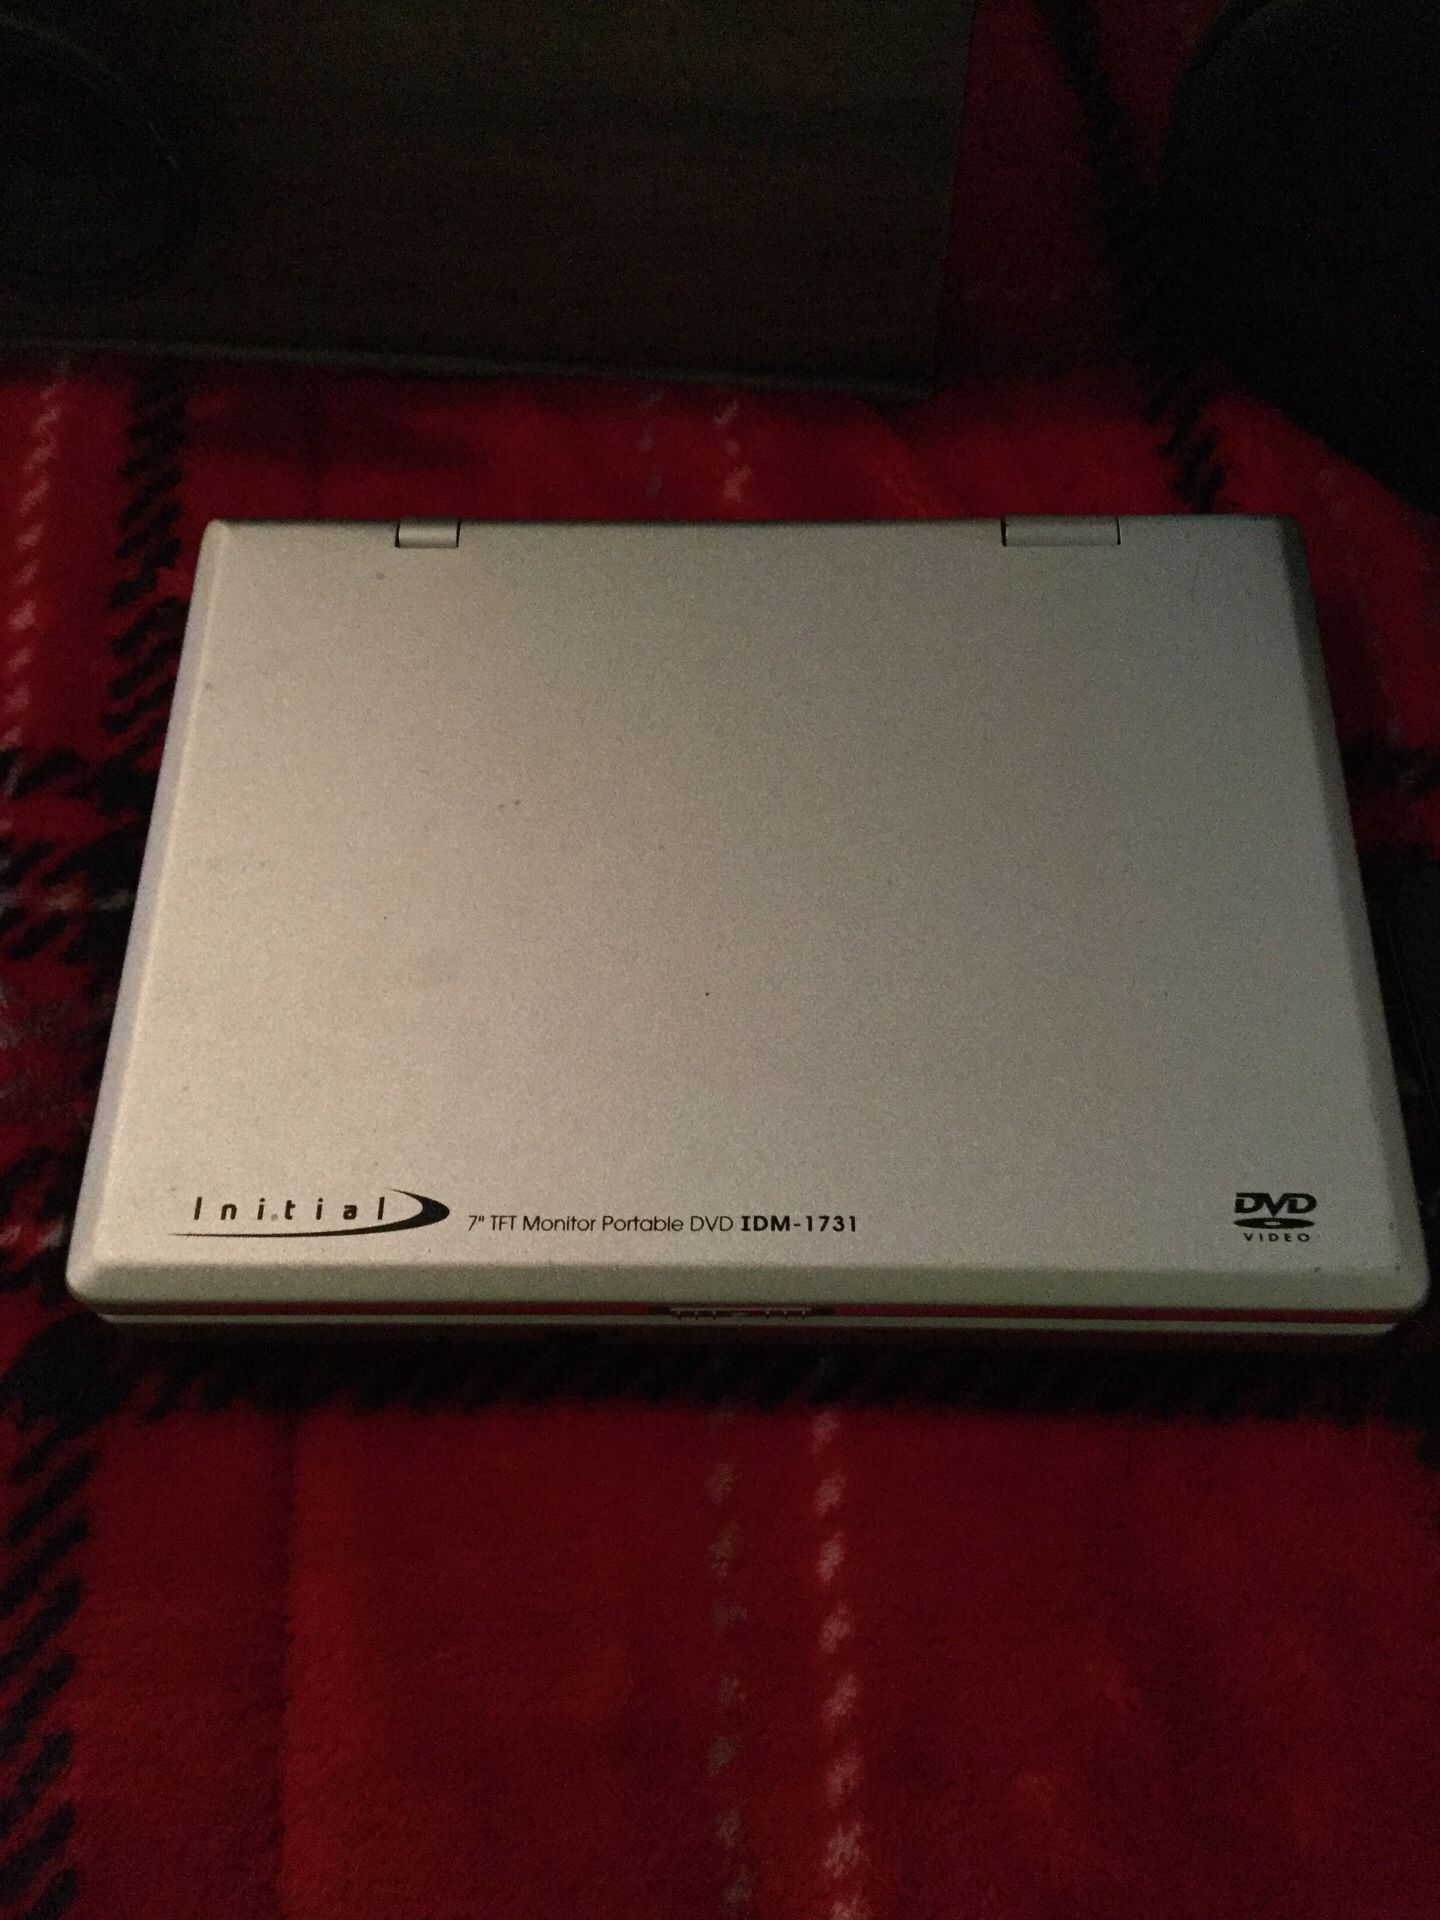 Portable DVD player for inside the car